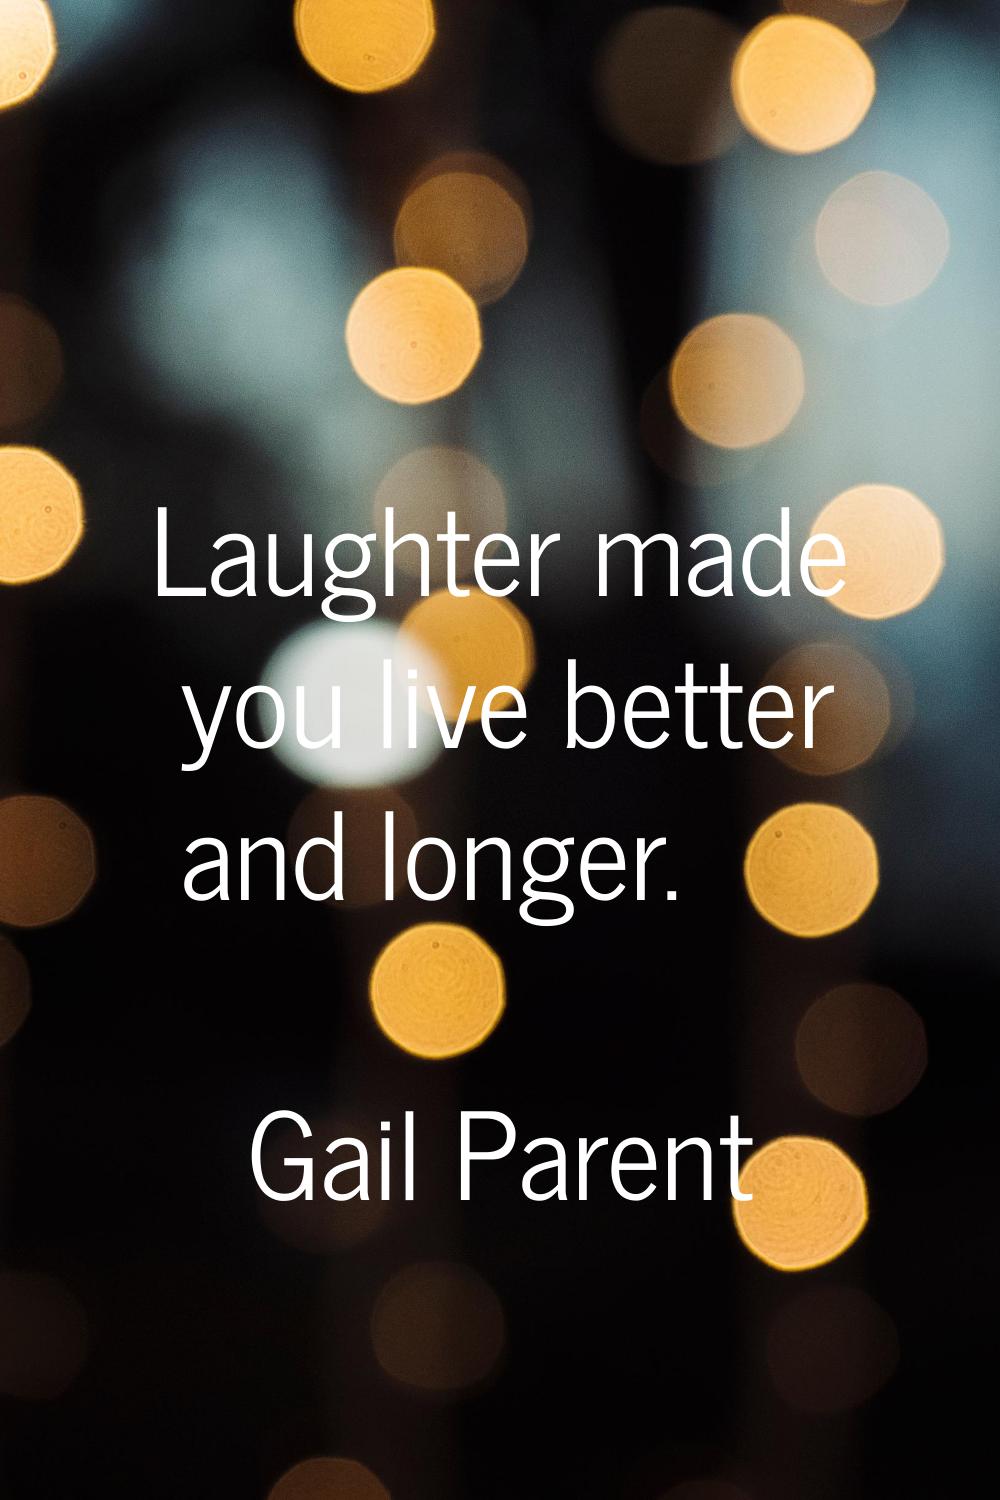 Laughter made you live better and longer.